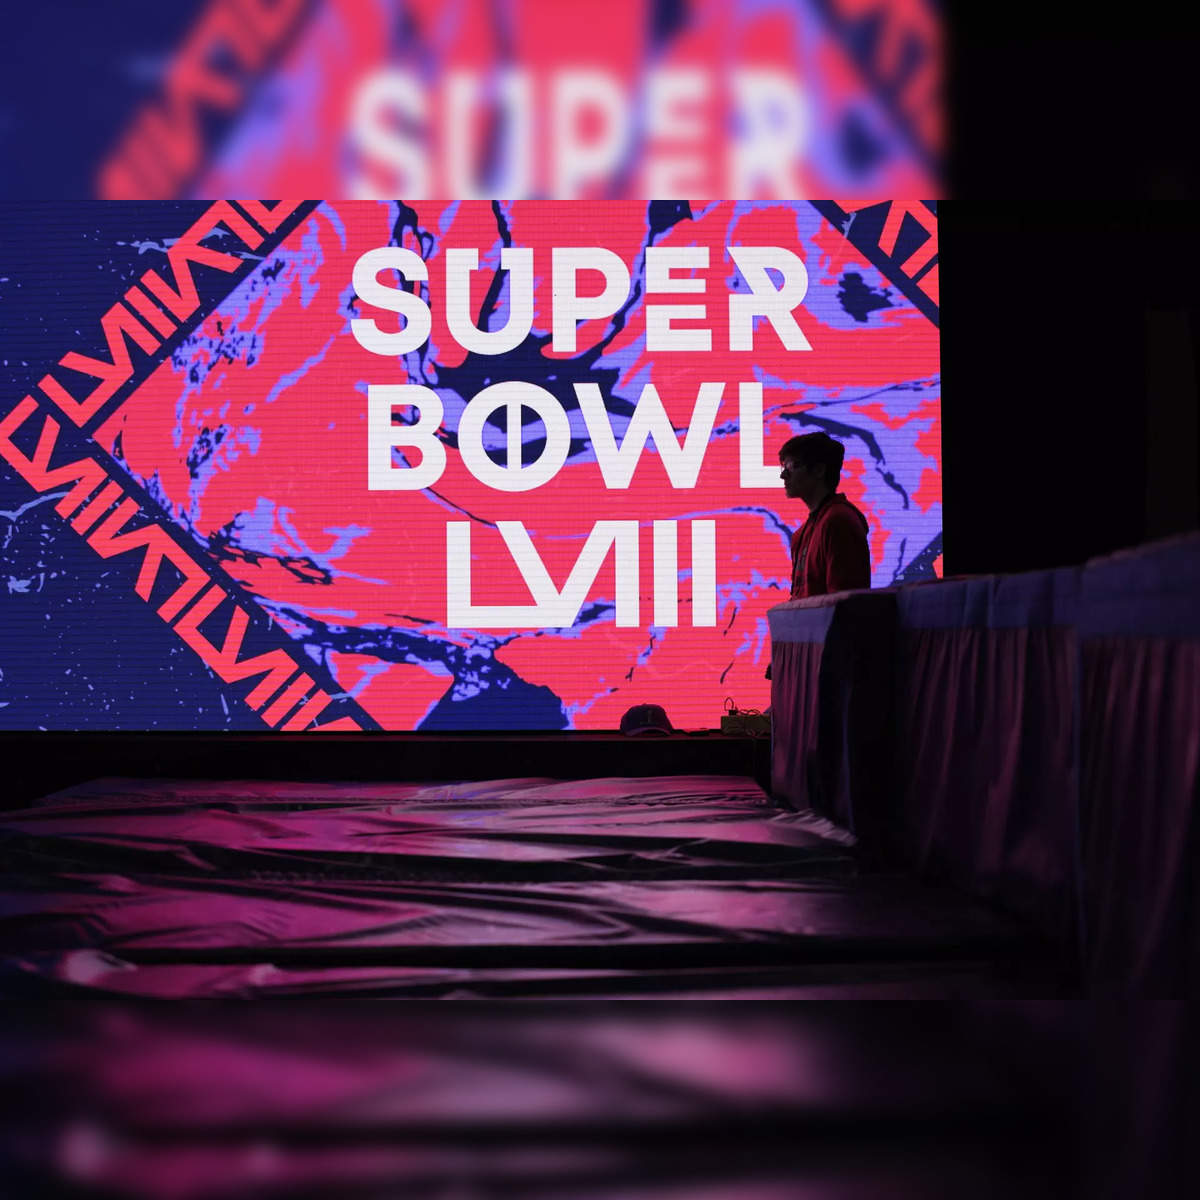 Super Bowl halftime: Here's everything you need to know - The